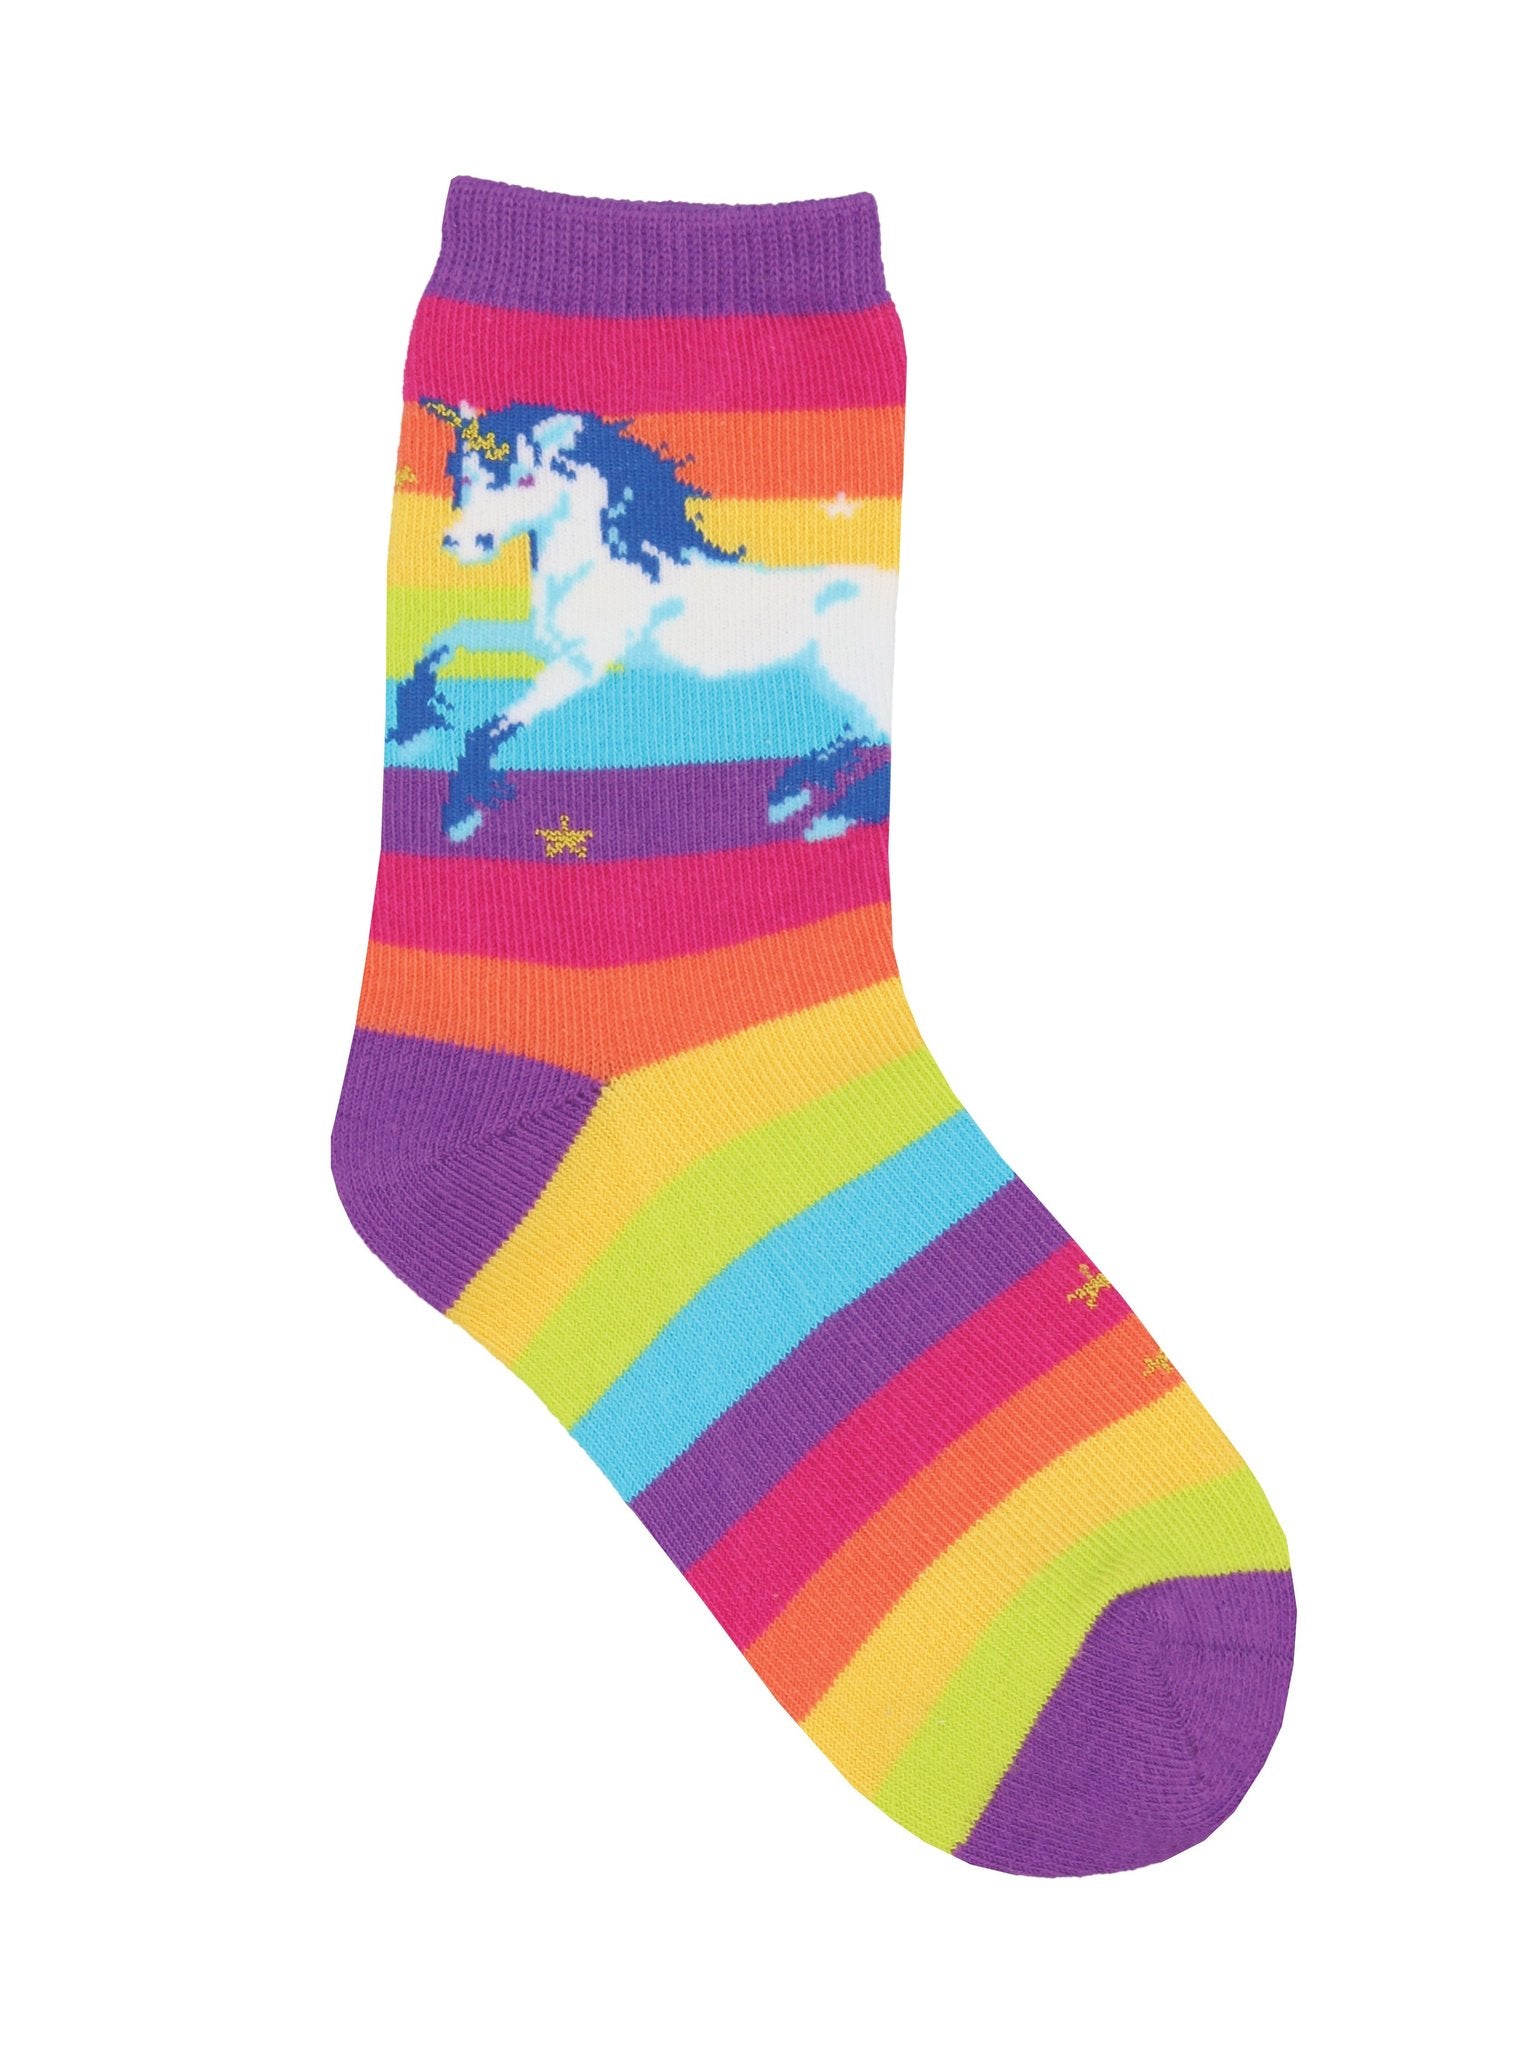 A single Sock Smith Brand kids cotton crew length sock with a white unicorn design on a neon striped sock. The cuff, heel, and toe are all vibrant purple.